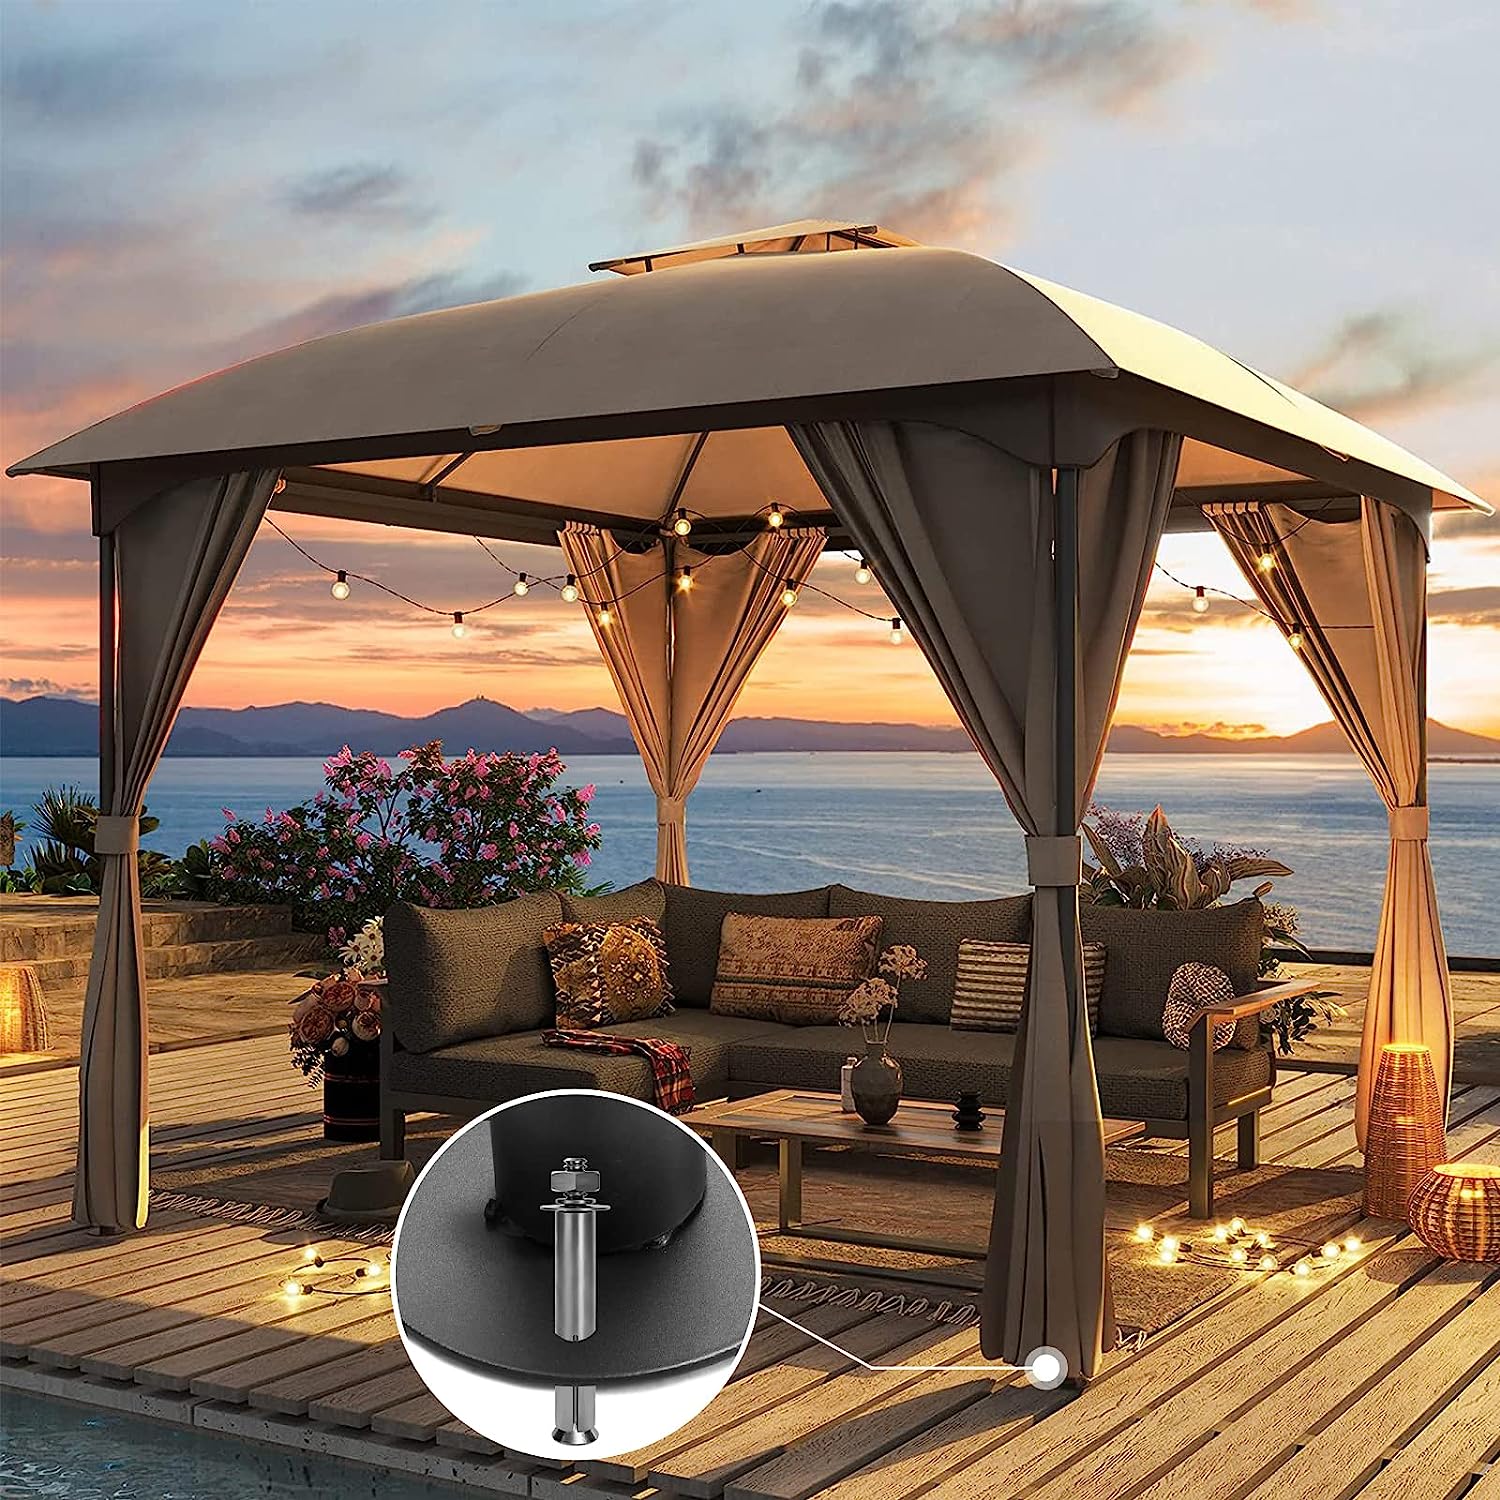 LAUSAINT HOME 10'x10' Outdoor Gazebo, Unique Arc Roof Design and Privacy Curtains Included, Khaki - image 2 of 11